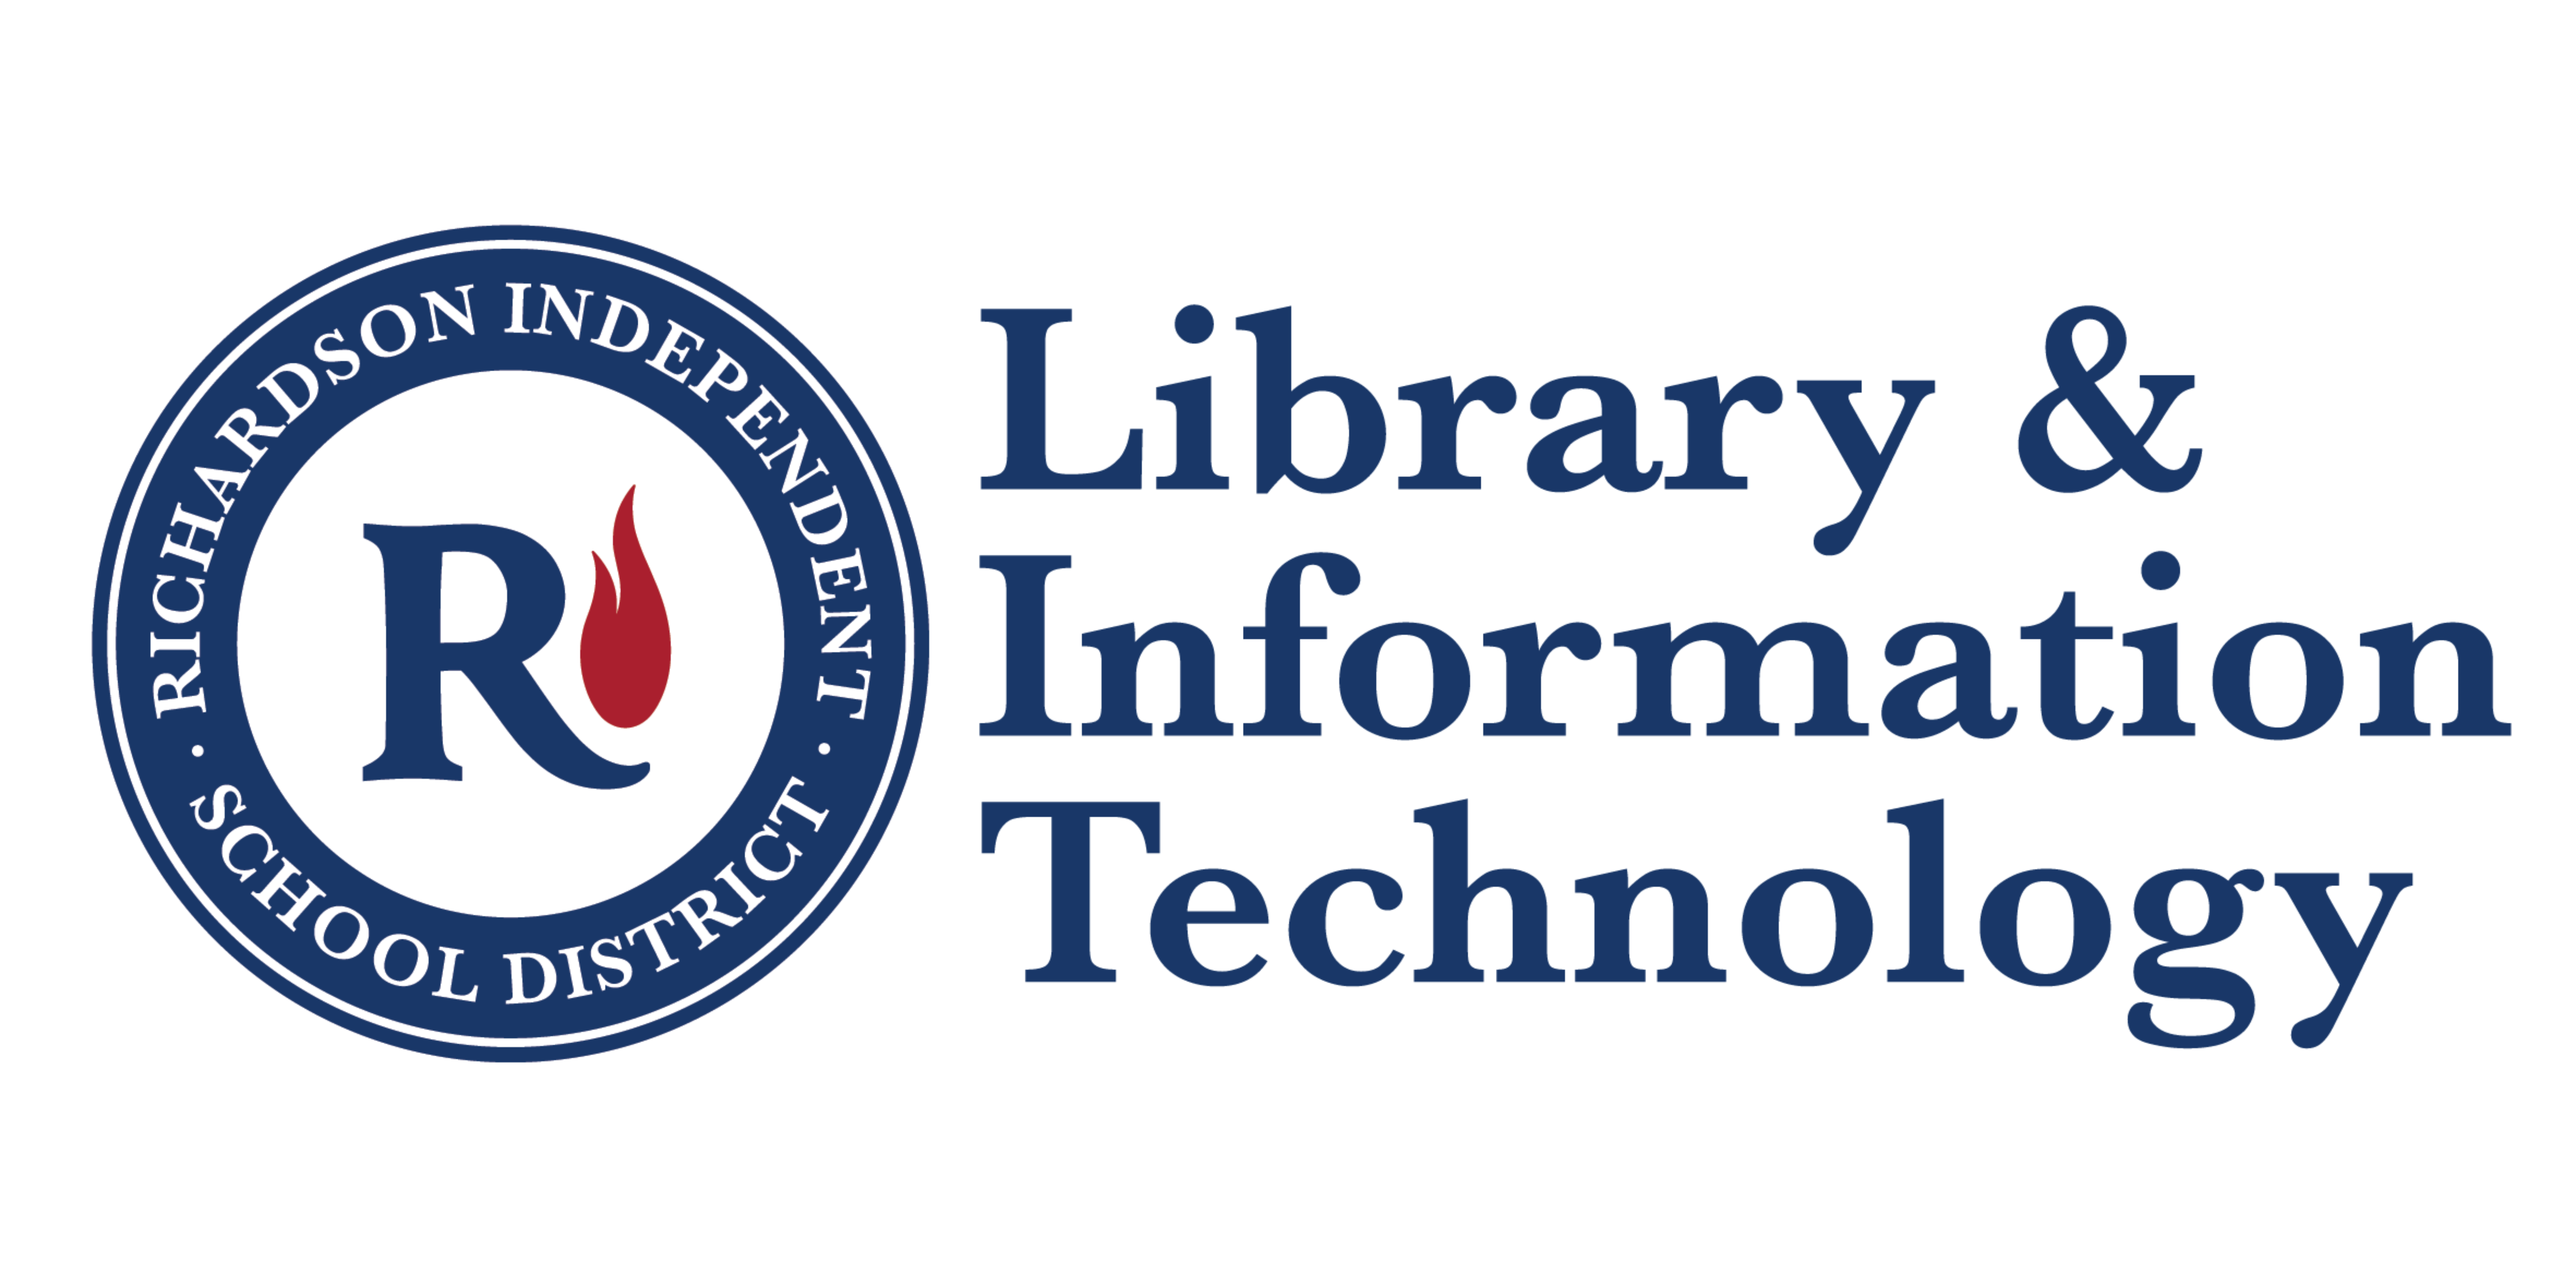 Richardson Independent Library & Information Technology